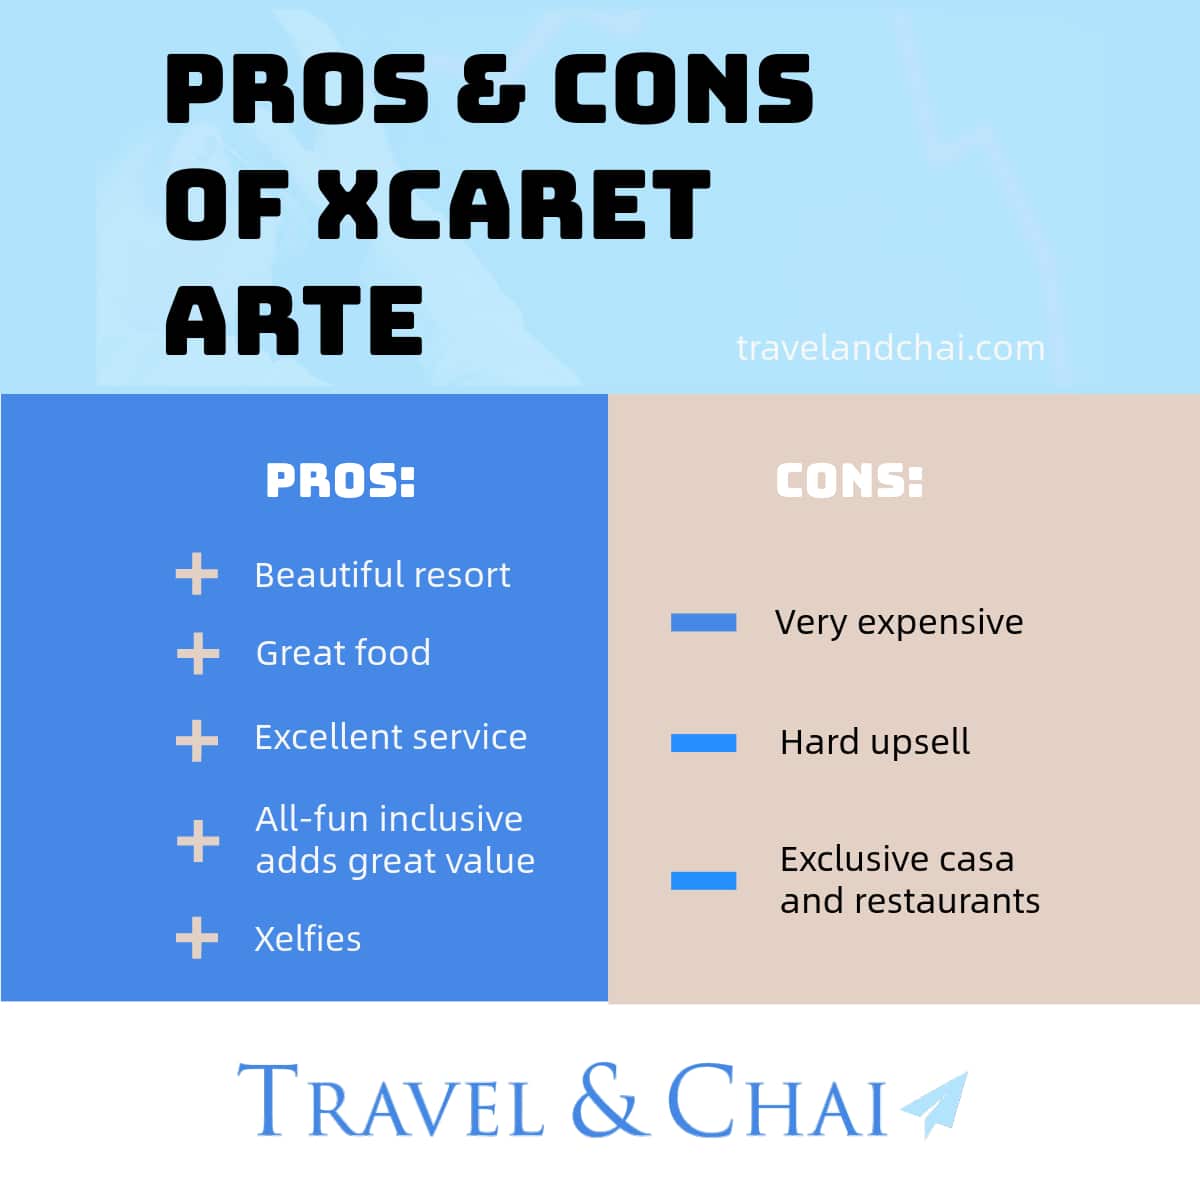 A three color infographic summaring the pros and cons of visiting Xcaret Arte hotel.